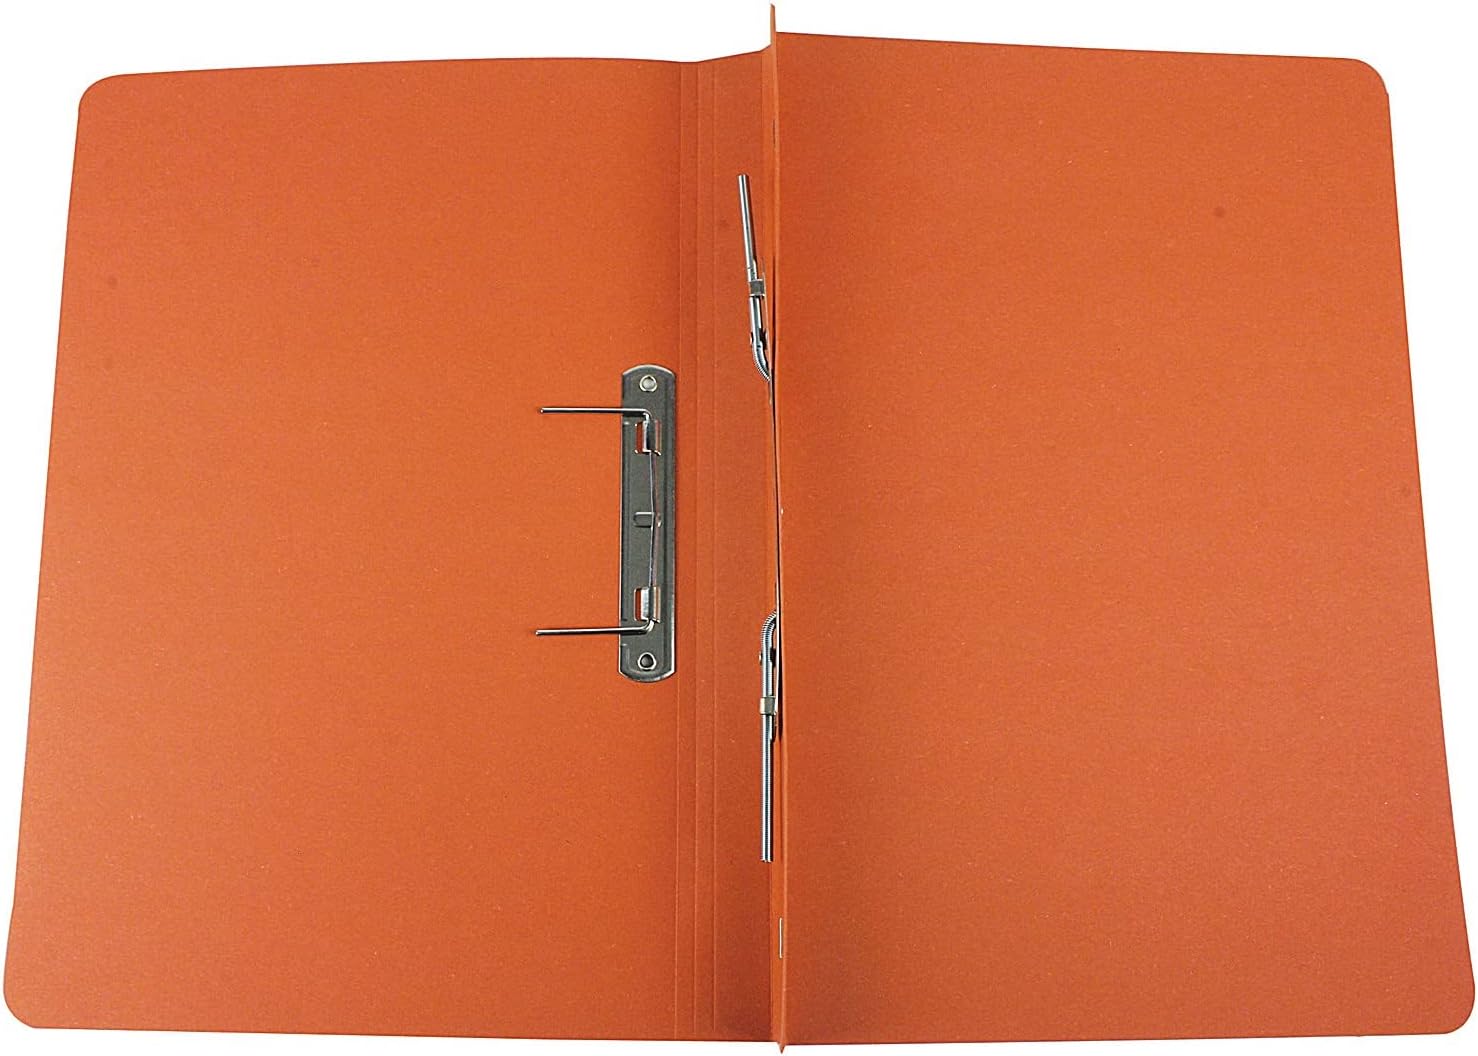 Pack of 25 Q-Connect 35mm Capacity Foolscap Orange Transfer Files